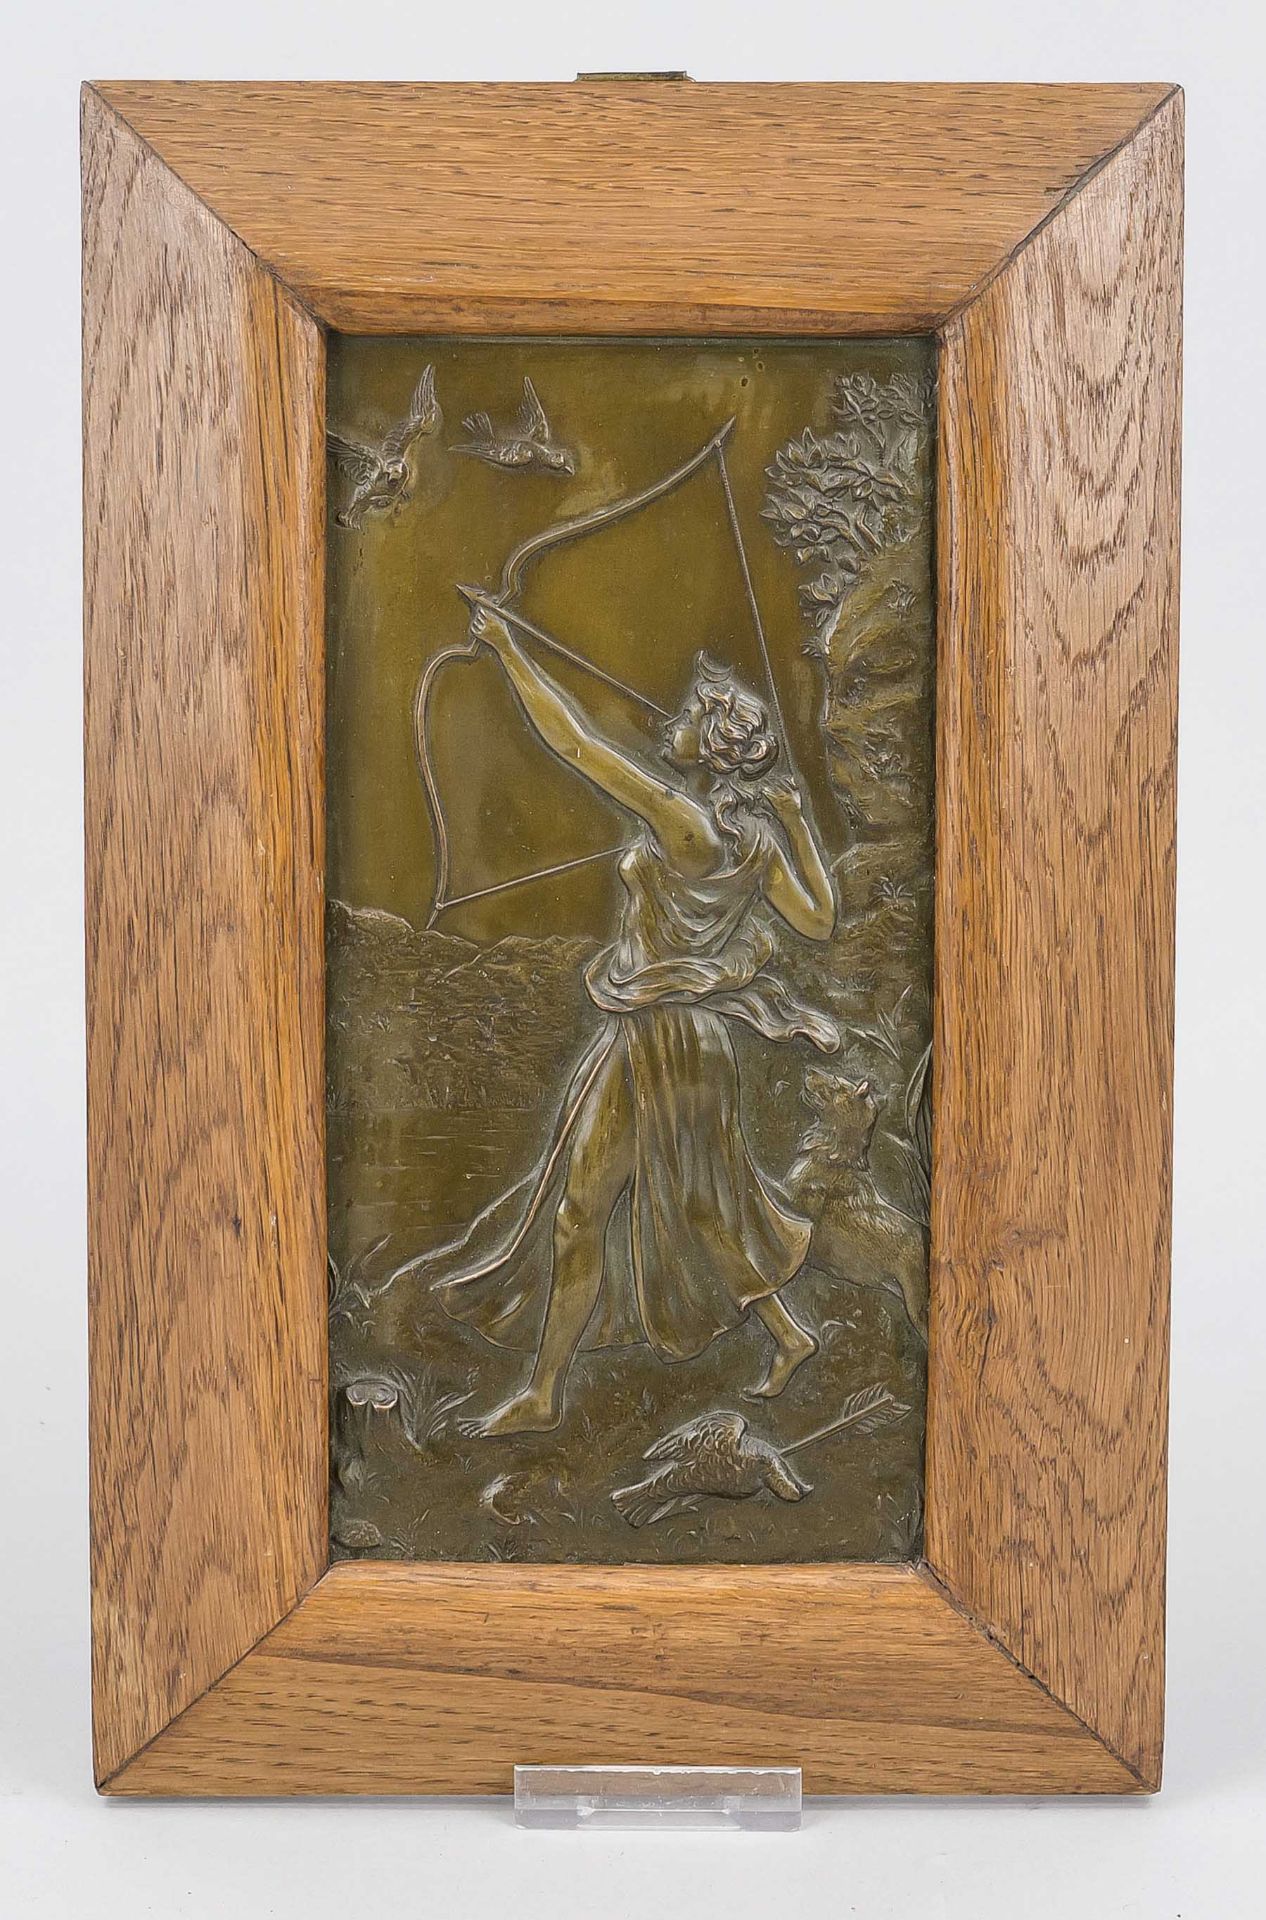 Hunting relief, late 19th century, bronze. Amazon and German shepherd hunting birds in an oak frame,